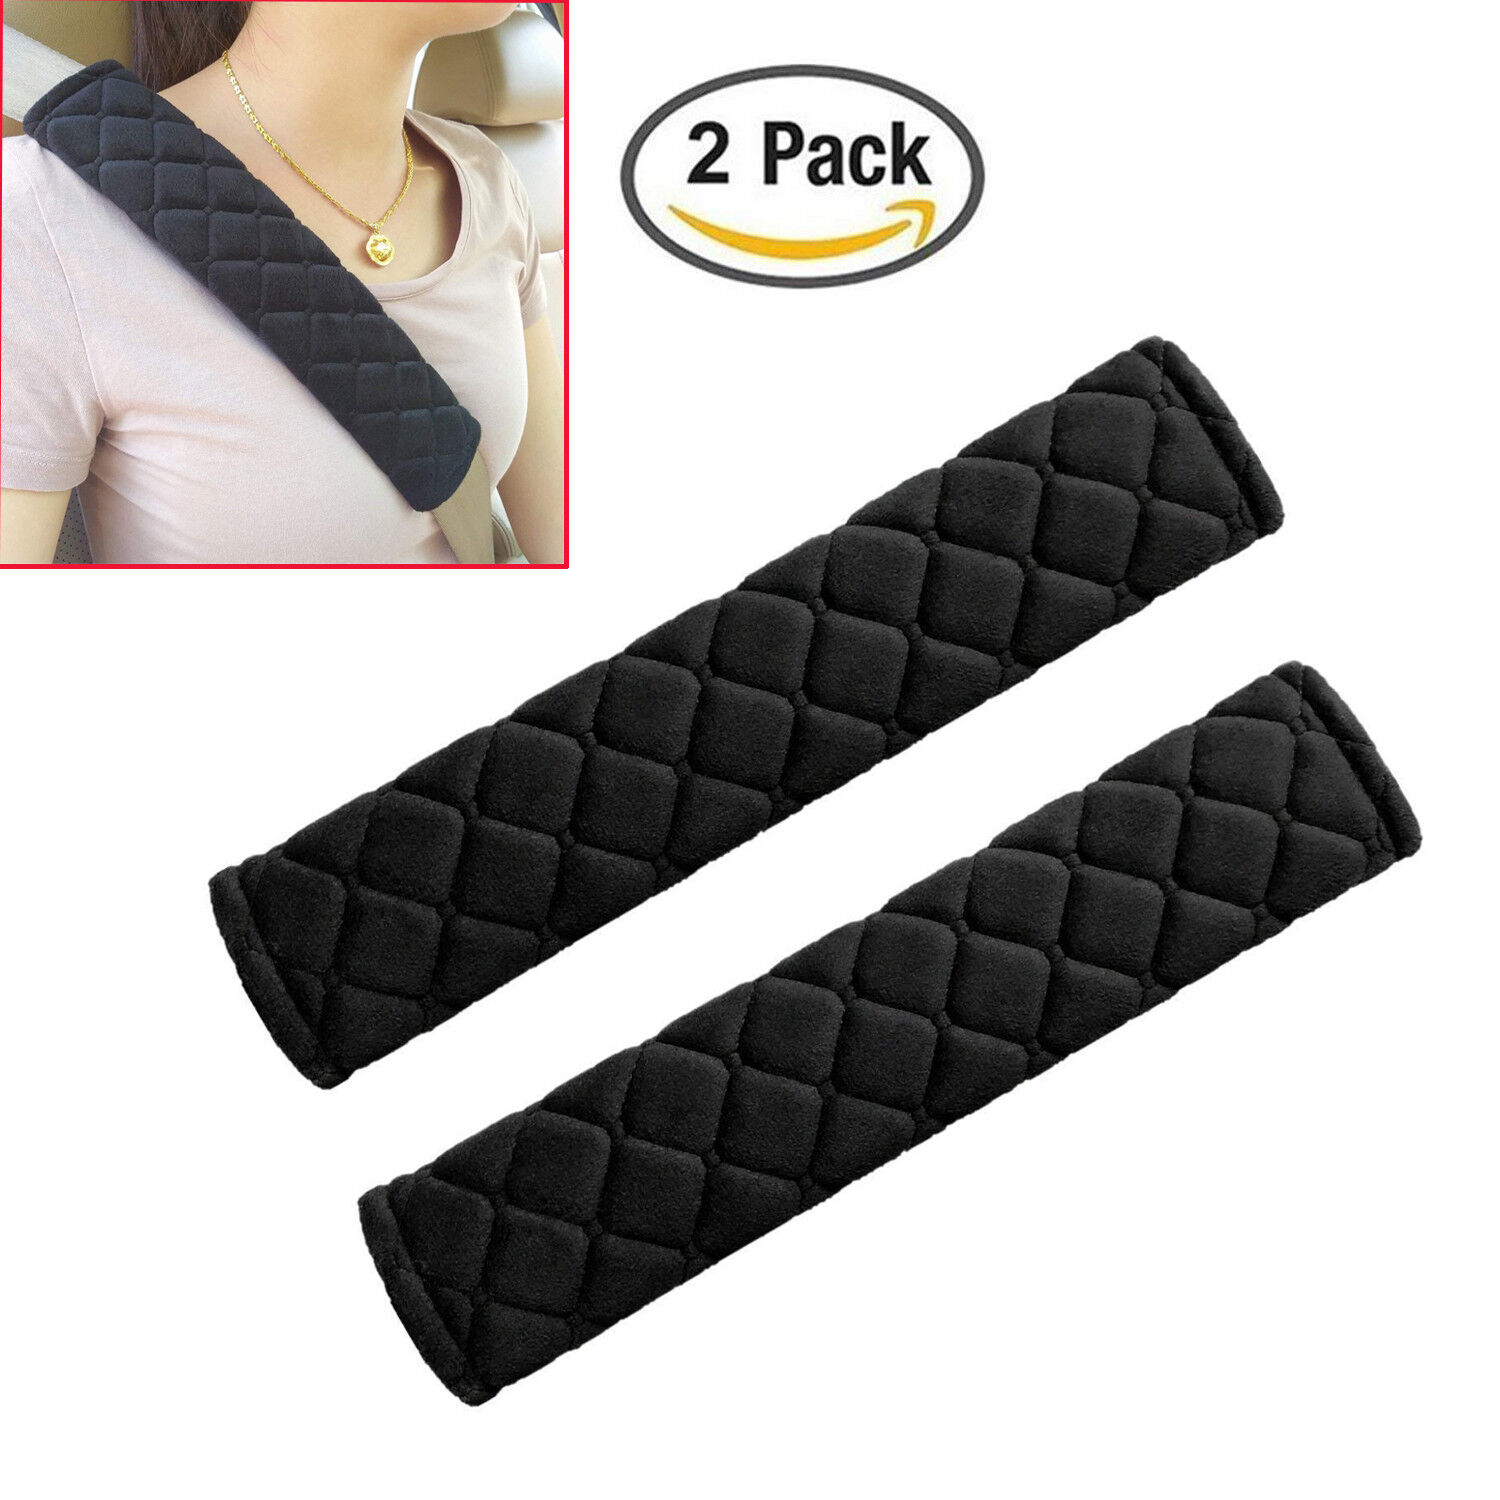 2pcs Car Safety Seat Belt Shoulder Pads Cover Cushion Harness Comfortable Pad